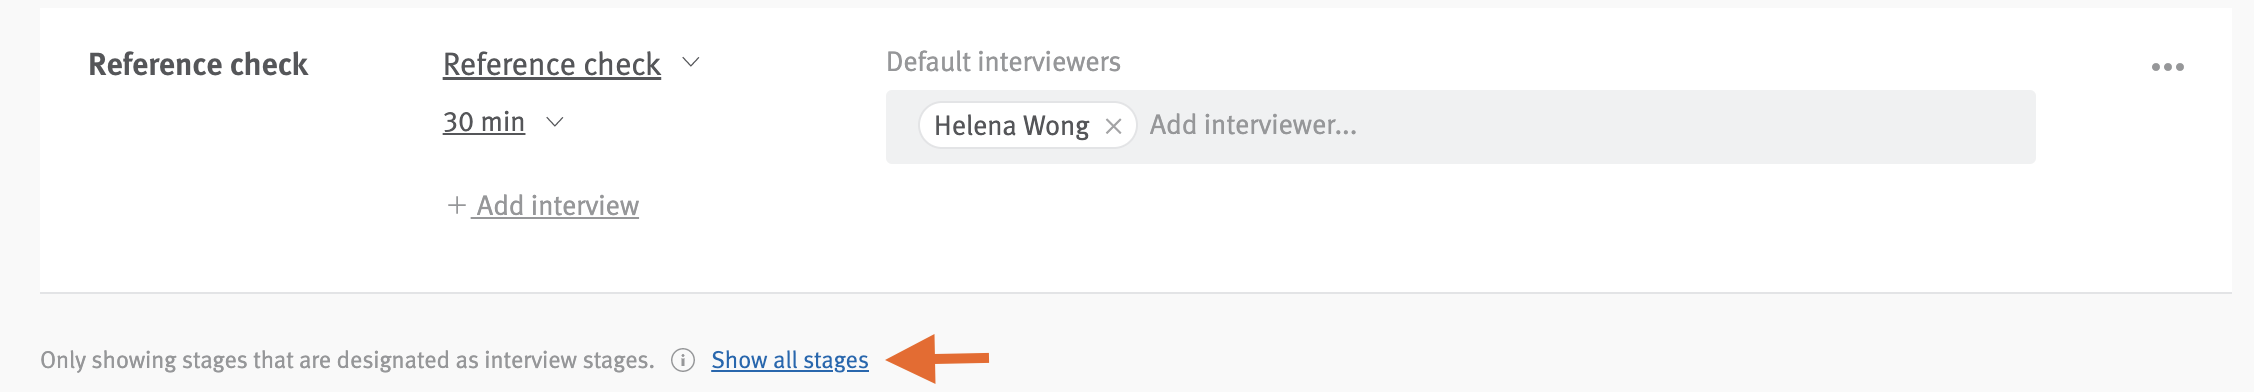 Arrow pointing to show all stages link in interview plan editor.